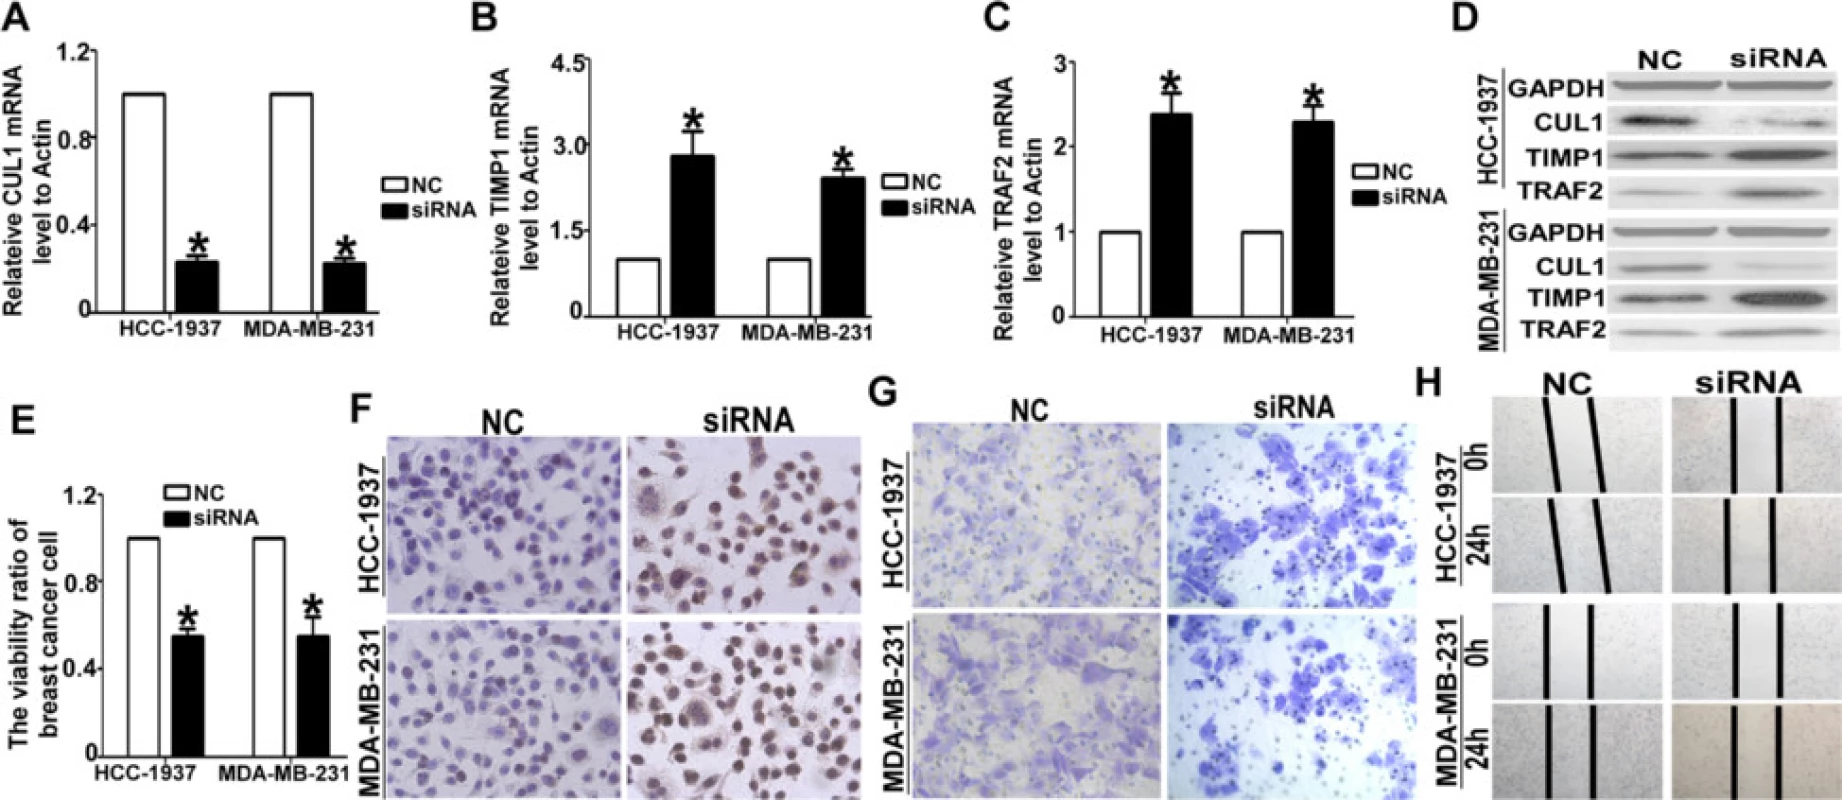 Knocked-down the CUL1 lead to the same effect of Selumetinib. a The siRNA could effective inhibited the CUL1 expression on mRNA levels (For HCC1973 cells, the CUL1 level was 0.23HCC19. For MDA-MB-231 cells, the CUL1 level was 0.22 ± 0.04.*P &lt; 0.01 compared with the NC group, which is 1.). b After silencing the CUL1, the TIMP1 level was increased (For HCC1973 cells, the TIMP1 level was 2.81 ± 0.75. For MDA-MB-231 cells, the TIMP1 level was 2.41 ± 0.23.*P &lt; 0.01 compared with the NC group, which is 1.). c The tendency of TRAF2 mRNA expression levels in MDA-MB-231 and HCC-1937 cells were equal to TIMP1 determined by QRT-PCR (For HCC1973 cells, the TRAF2 level was 2.38 ± 0.45. For MDA-MB-231 cells, the TRAF2 level was 2.29 ± 0.33. *P &lt; 0.01 compared with the NC group, which is 1.). d the CUL1, TIMP1 and TRAF2 protein expression levels in HCC-1937 and MDA-MB-231 cells were examined by WB analysis. e After transfected the siRNA-CUL into HCC-1937 and MDA-MB-231 cells, the cell proliferation ratio was inhibited significantly (For HCC1973 cells, the viability ratio was 0.55 ± 0.06. For MDA-MB-231 cells, the viability ratio was 0.53 ± 0.15. *P &lt; 0.01 compared with the NC group, which is 1.). f the Tunnel analysis clarified this negative effect of siRNA-CUL1. g The transwell analysis showed, the numbers of the migrated cells in the NC group of both two TNBC cells, are almost double that are in the siRNA-CUL1 group h. The wound-healing assay showed the cell migration ability was reduced observably in siRNA-CUL1 group. For the NC group, the gap closure rate is more than two to thirds in both HCC-1937 and MDA-MB-231 cells. For siRNA-CUL1 group, the gap closure rate is less than one thirds